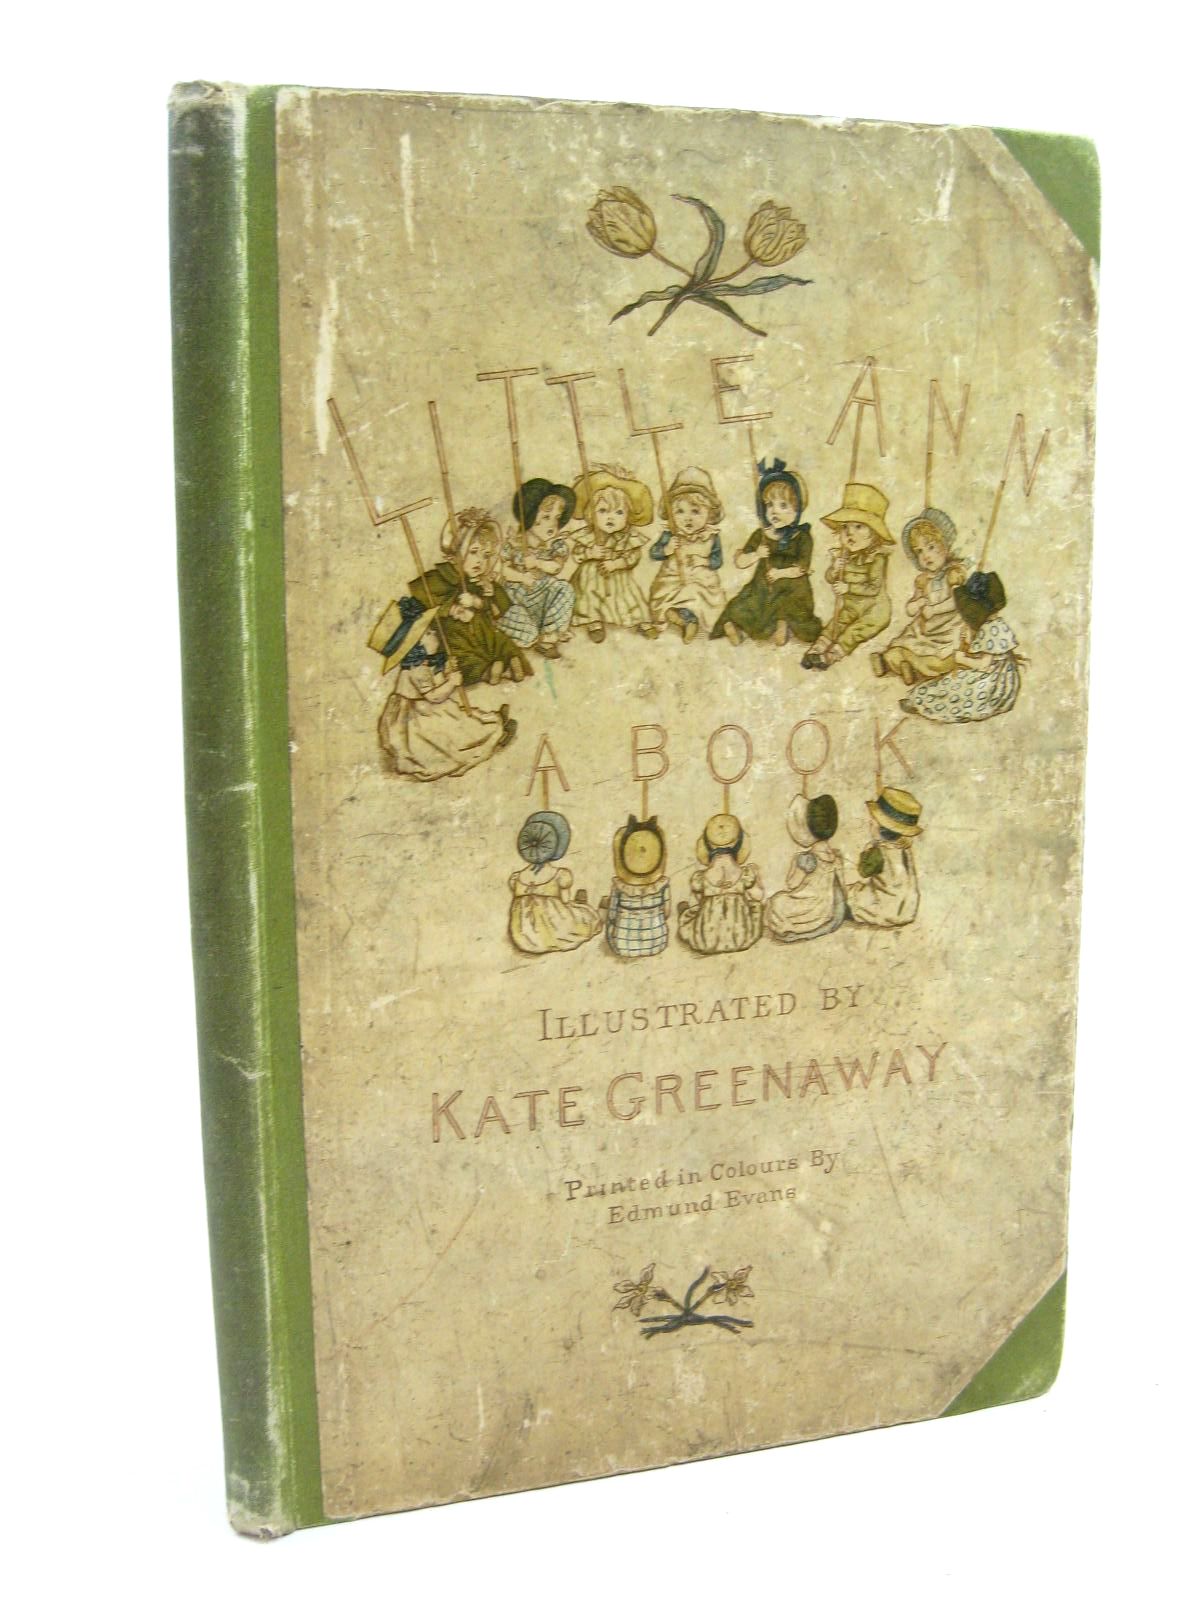 TAYLOR, JANE & TAYLOR, ANN ILLUSTRATED BY GREENAWAY, KATE - Little Ann and Other Poems